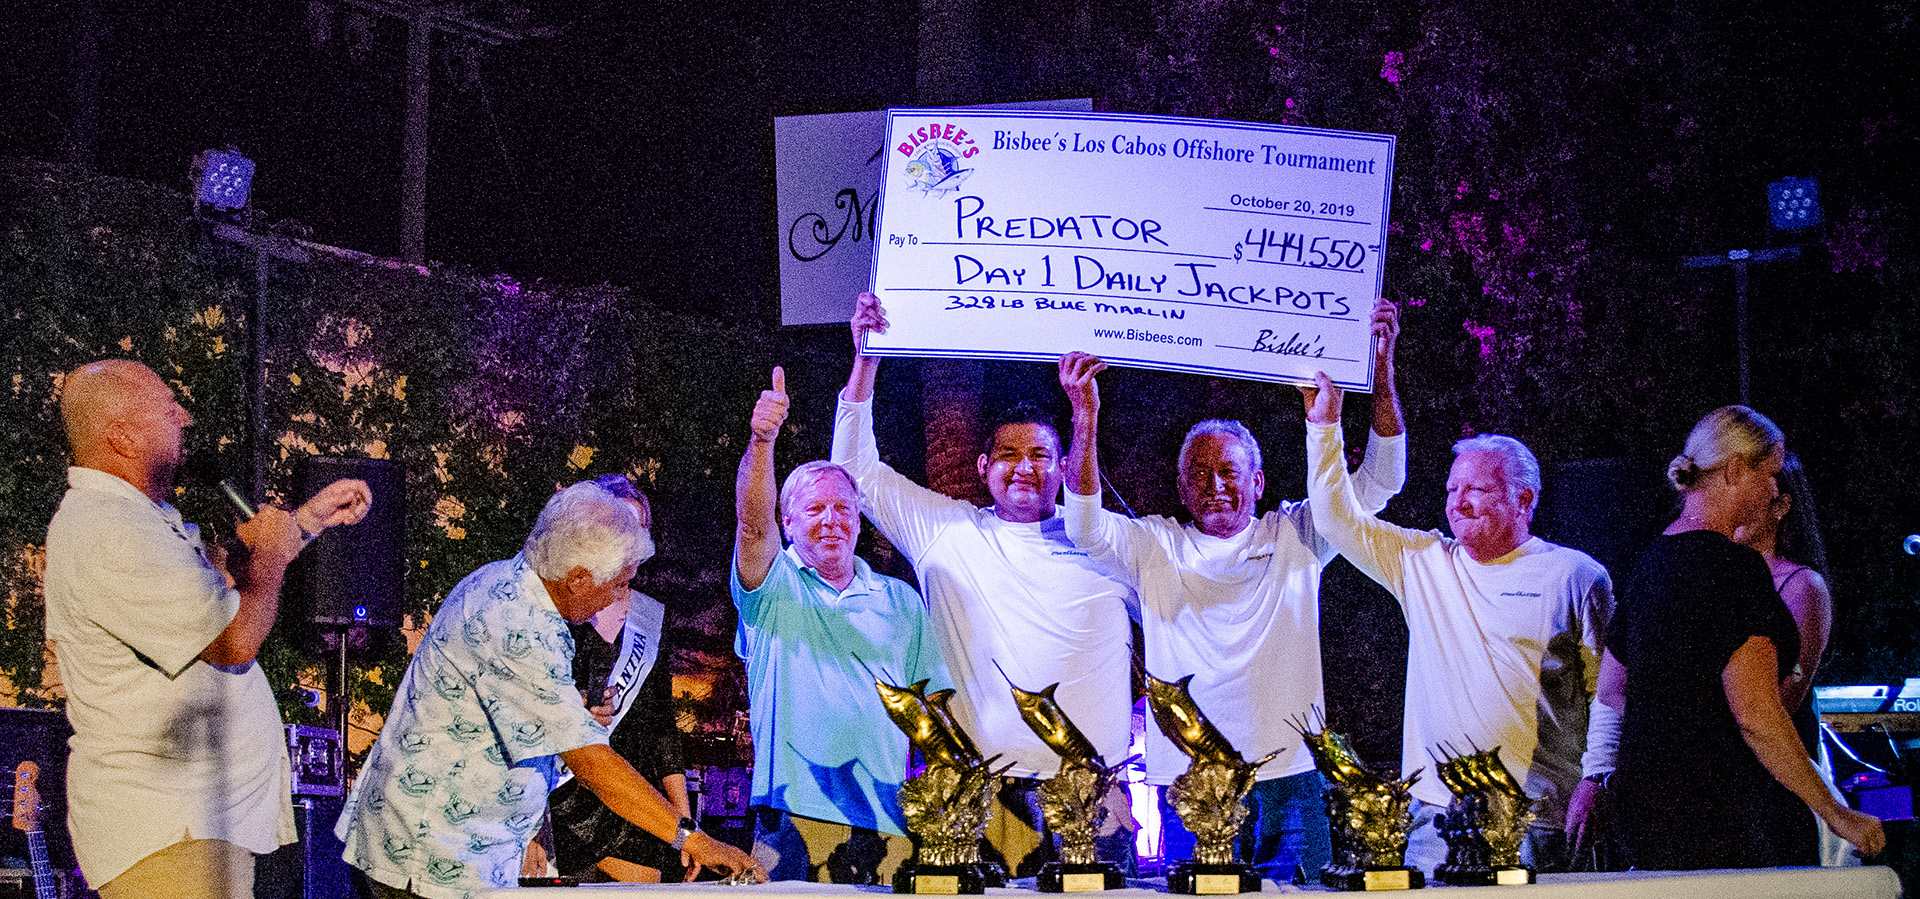 LCO Day One winner receives $444,550 for Day 1 Daily Jackpot for a 328 Blue Marlin